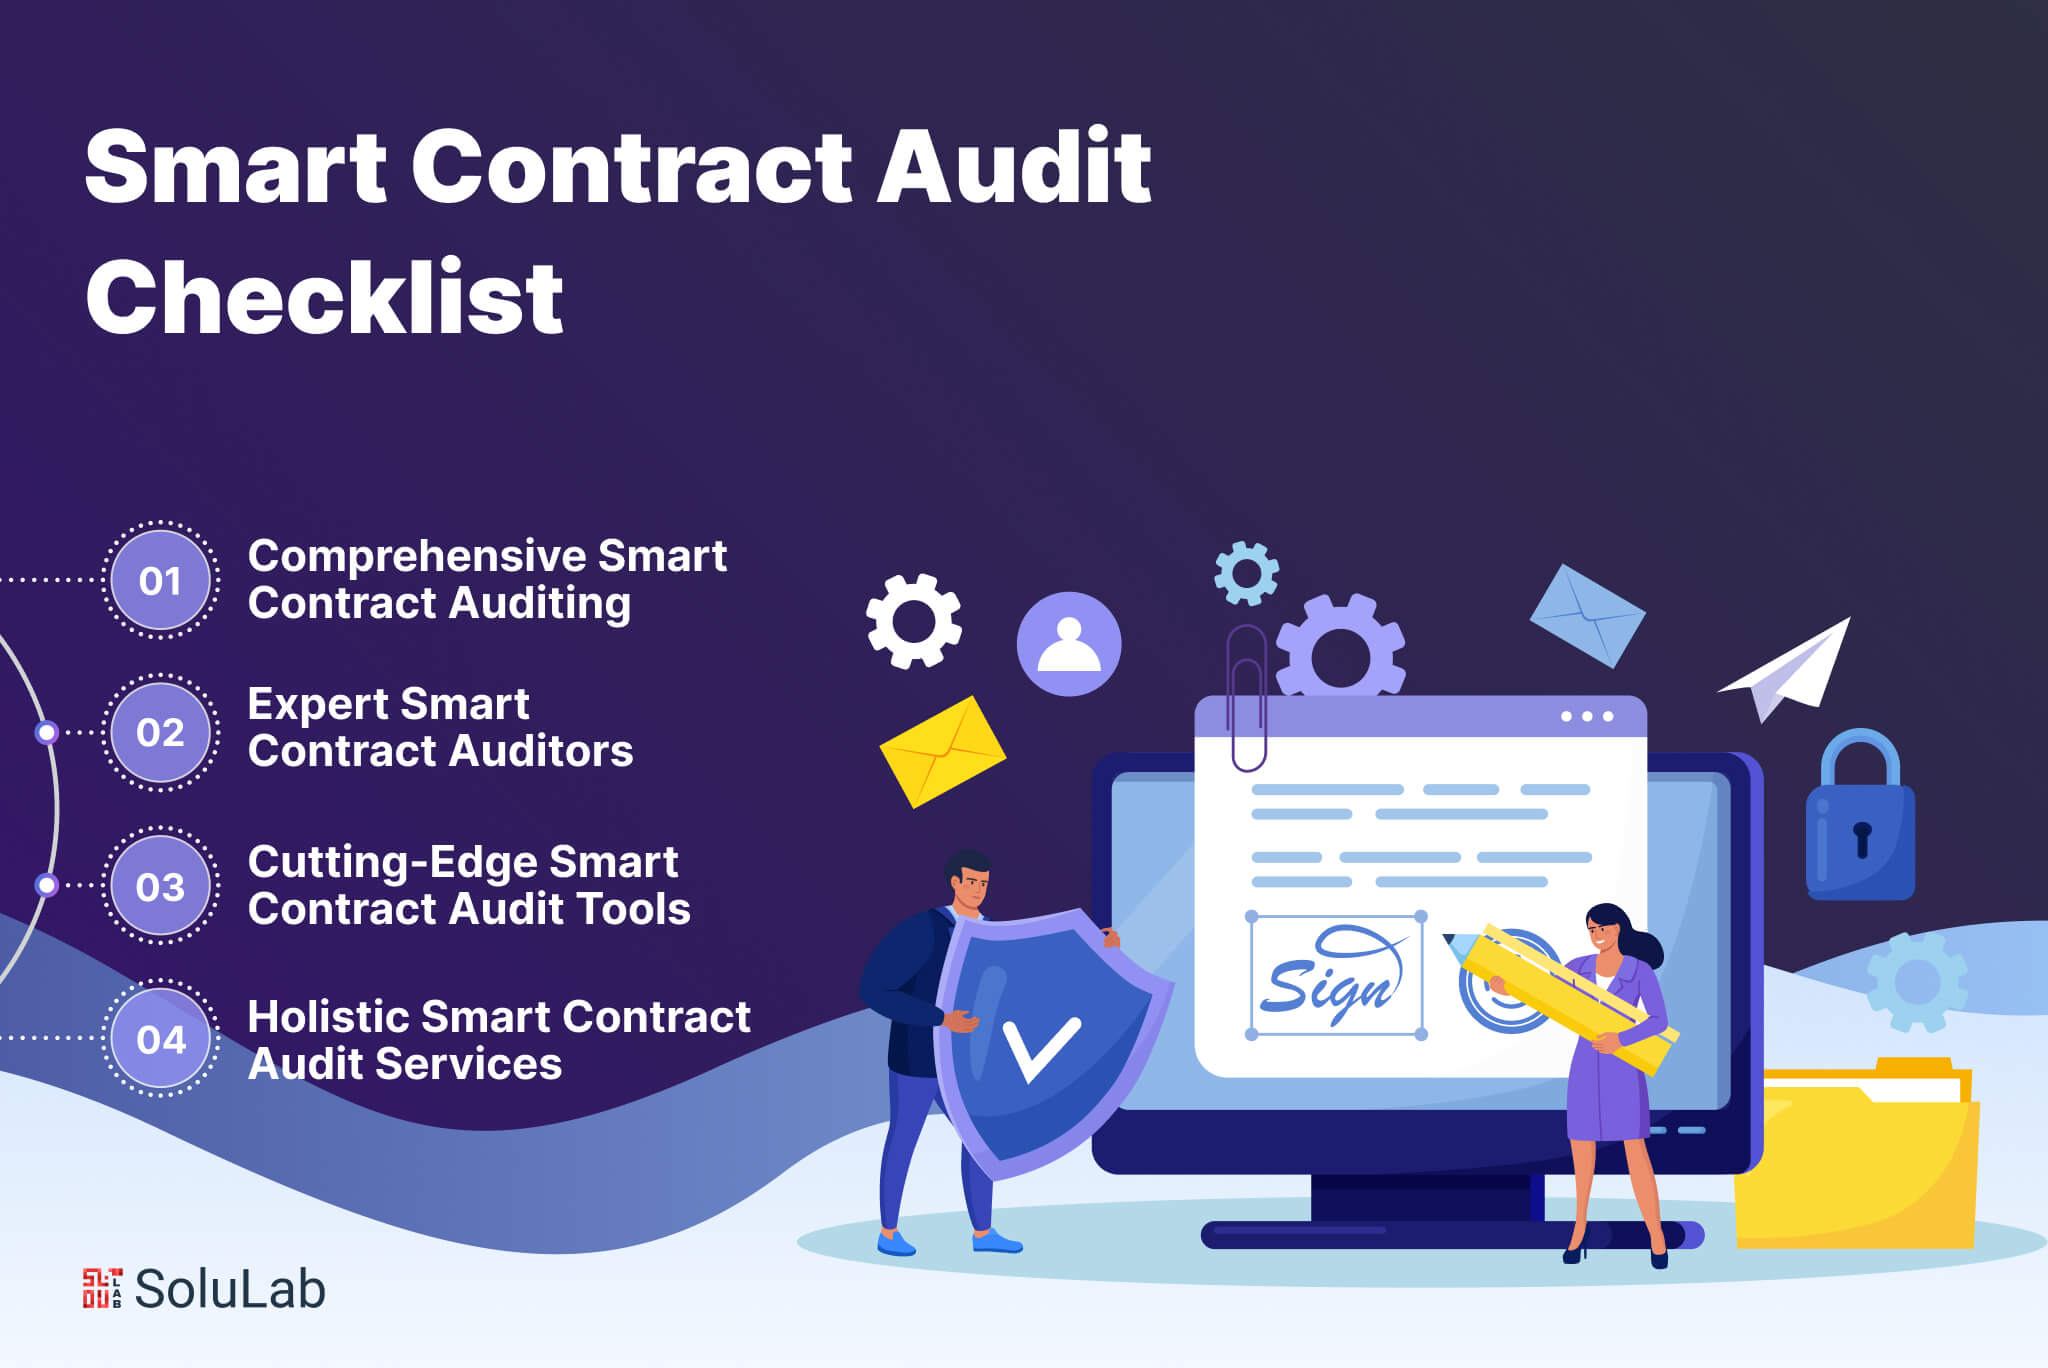 Checklist for Smart Contract Audit